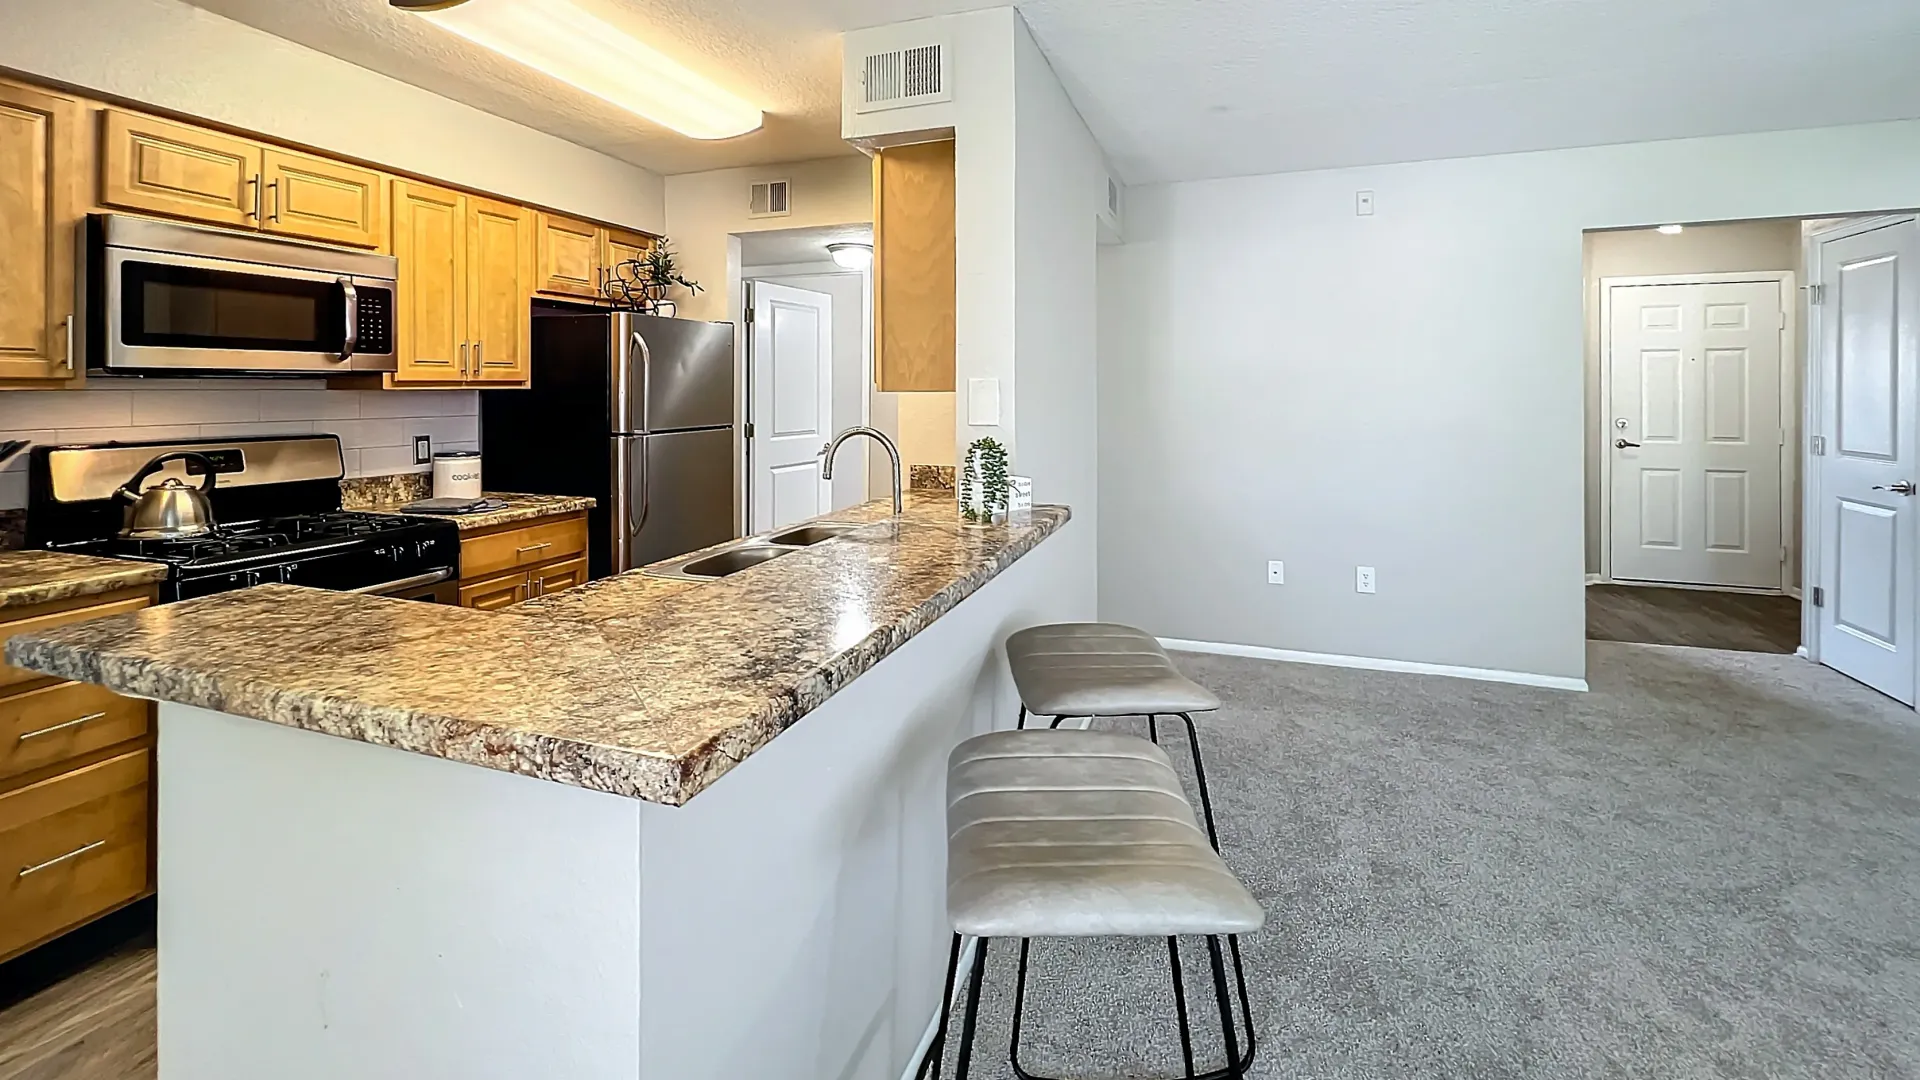 Modern kitchen with a breakfast bar, granite-style countertops and stainless steel appliances.